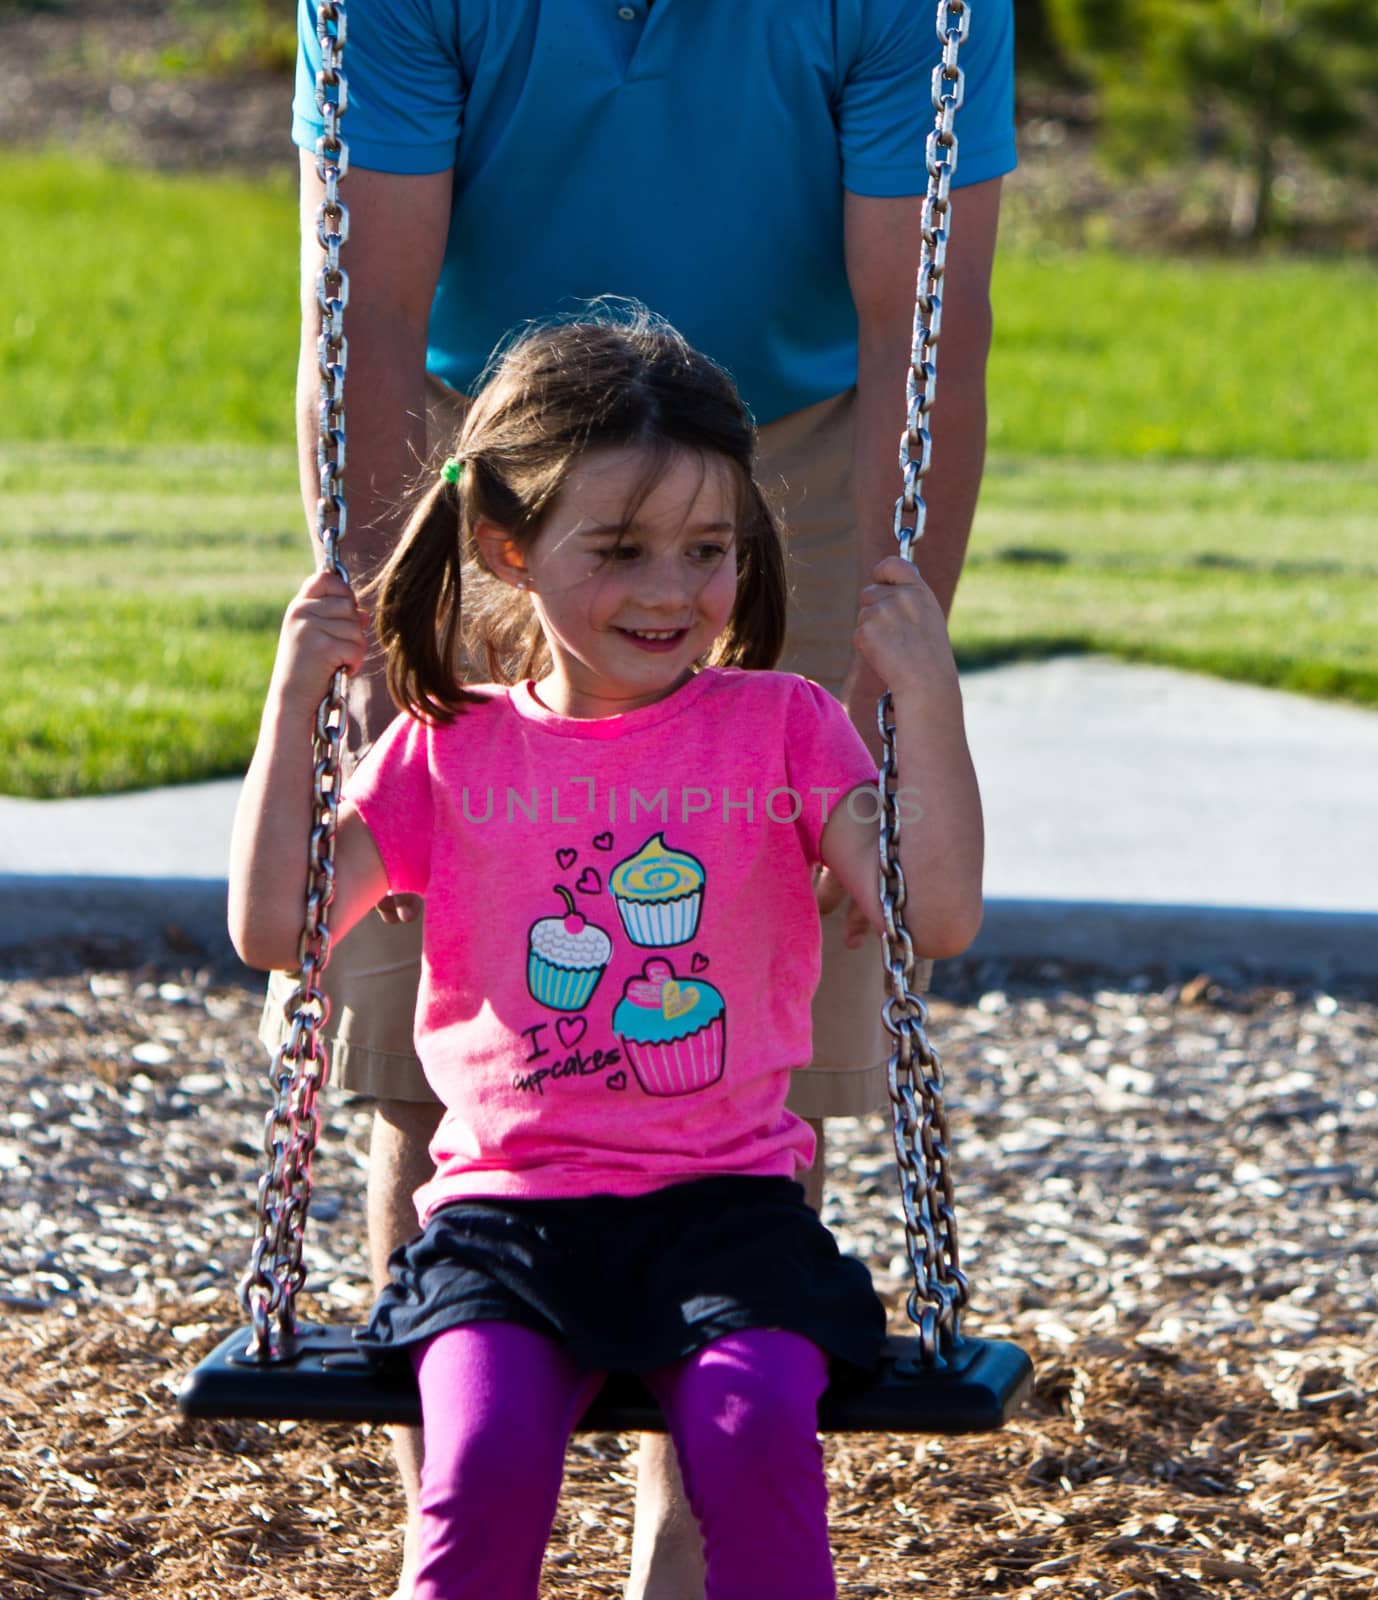 Family playing on the swing set